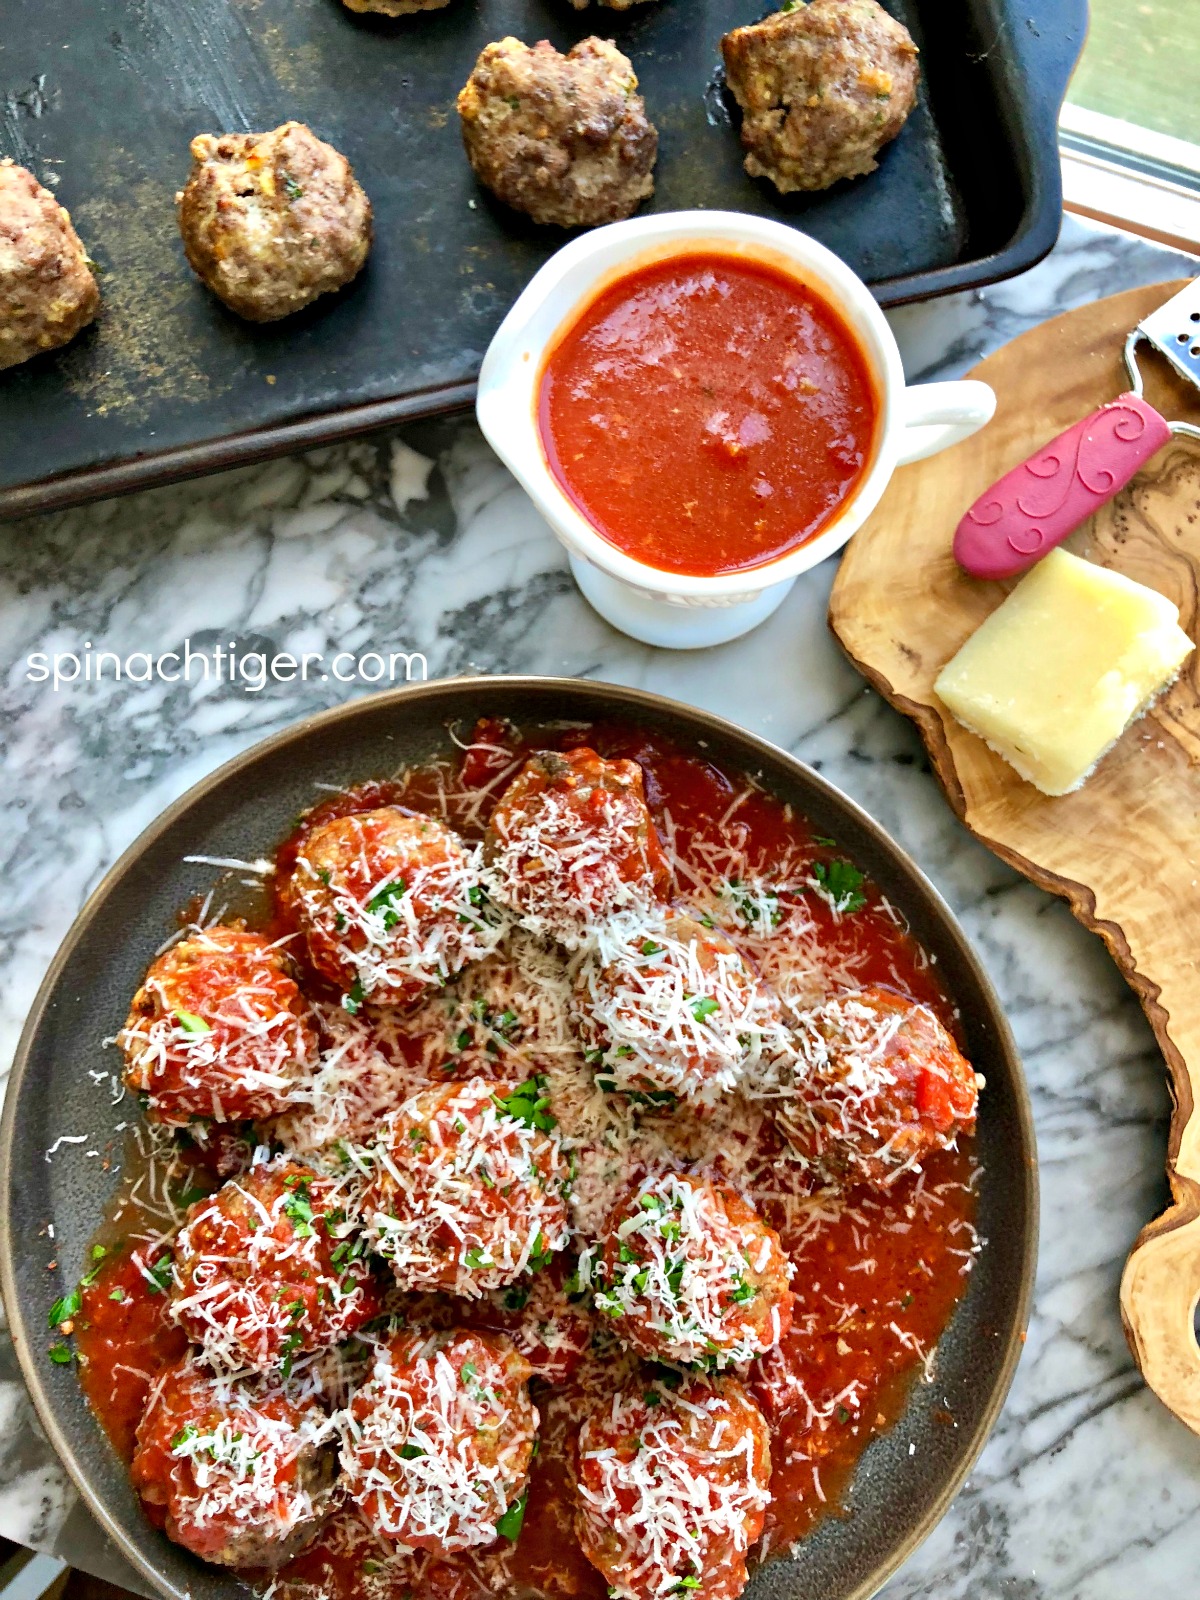 Keto Meatballs with Homemade Sauce from Spinach TIger